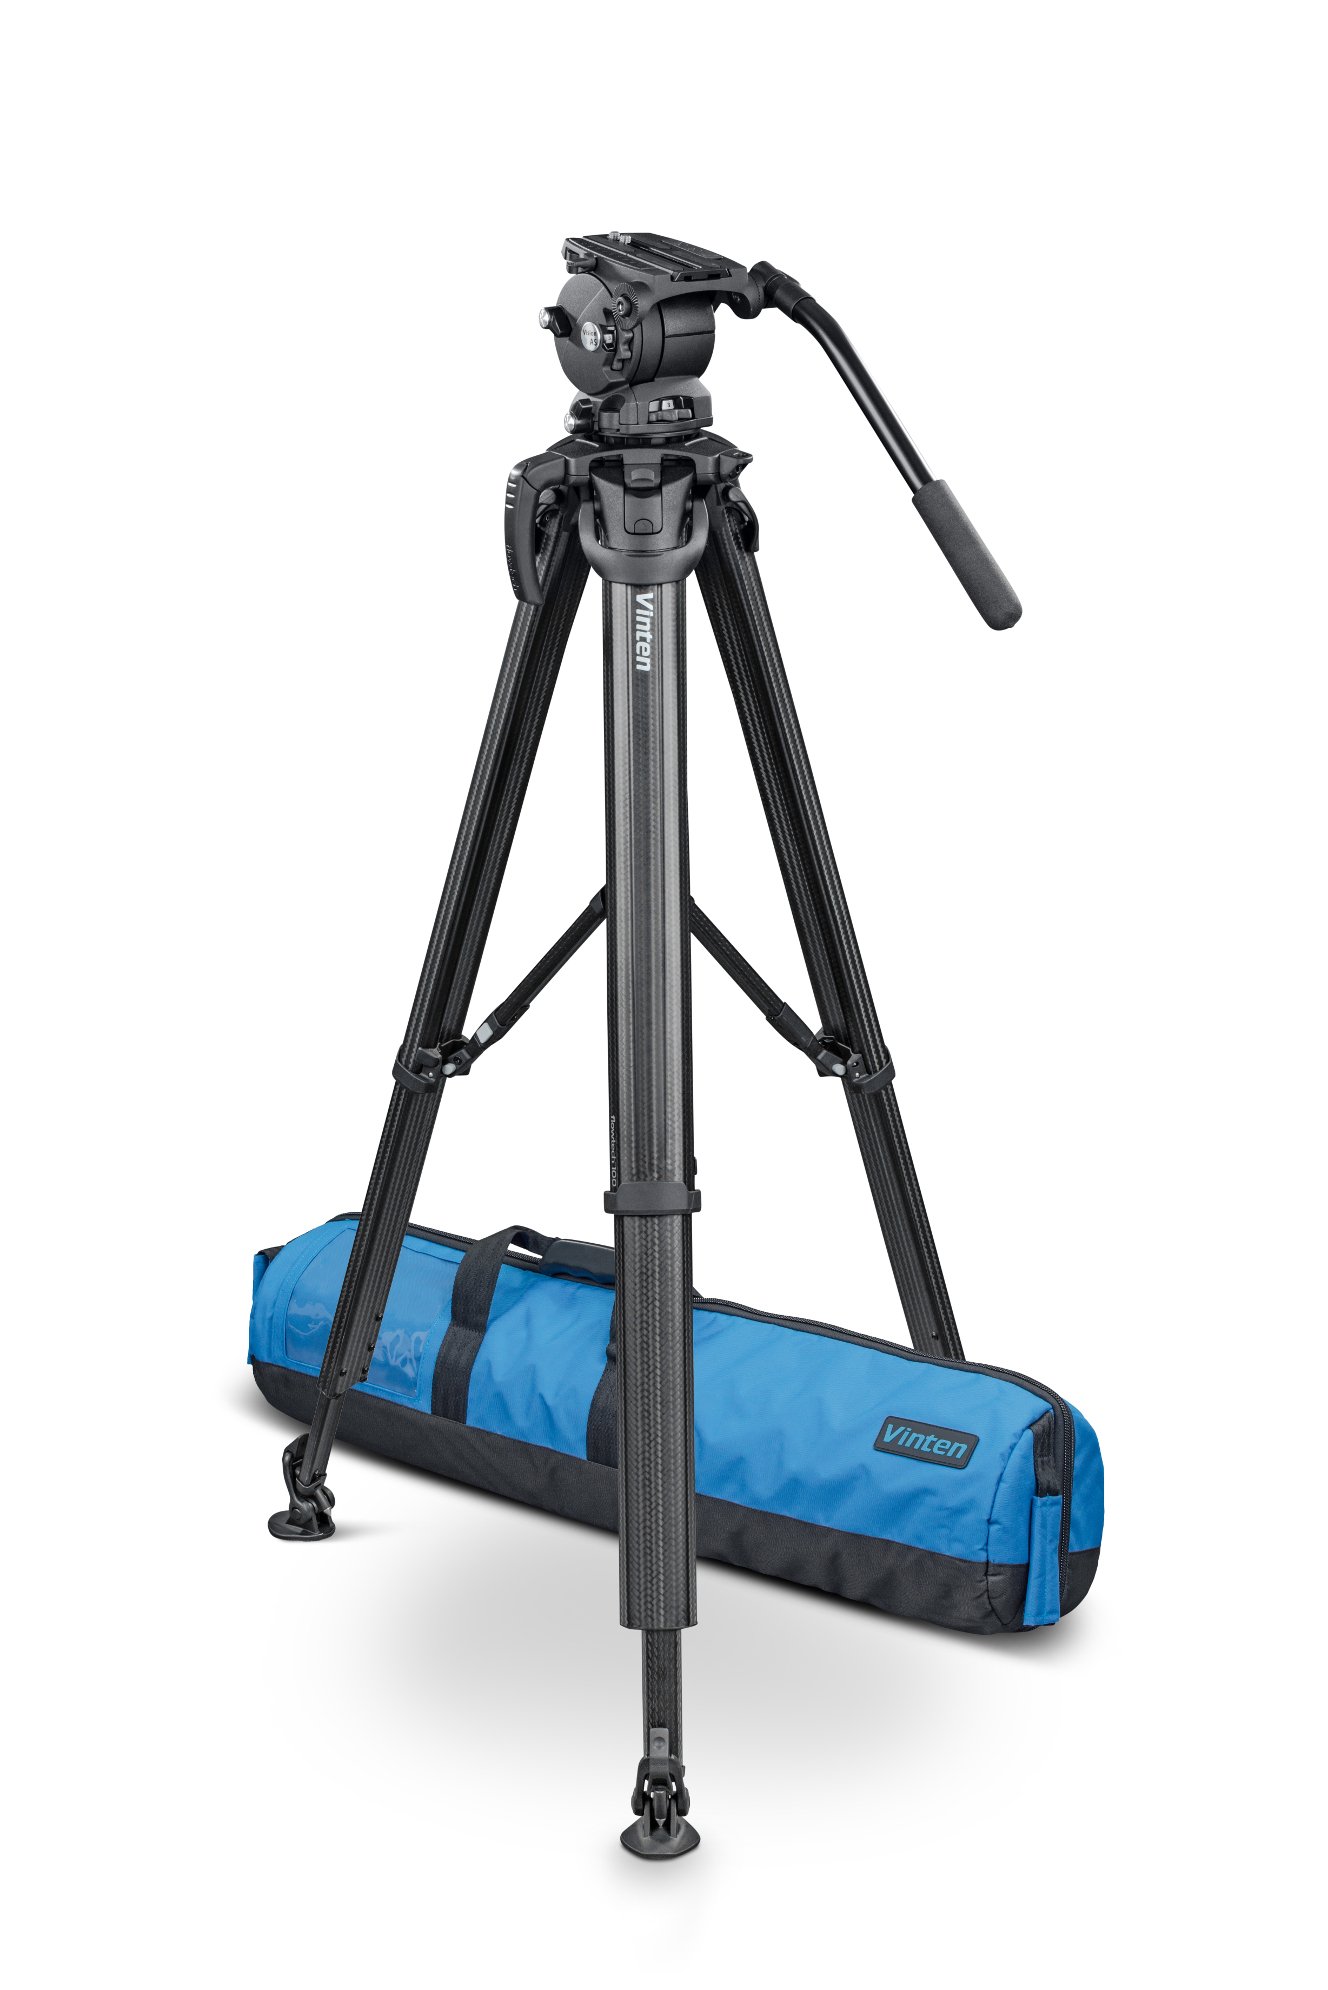 Oconnor flowtech 100 2-Section Carbon Fiber Tripod with Feet and Attachment Mount - 4